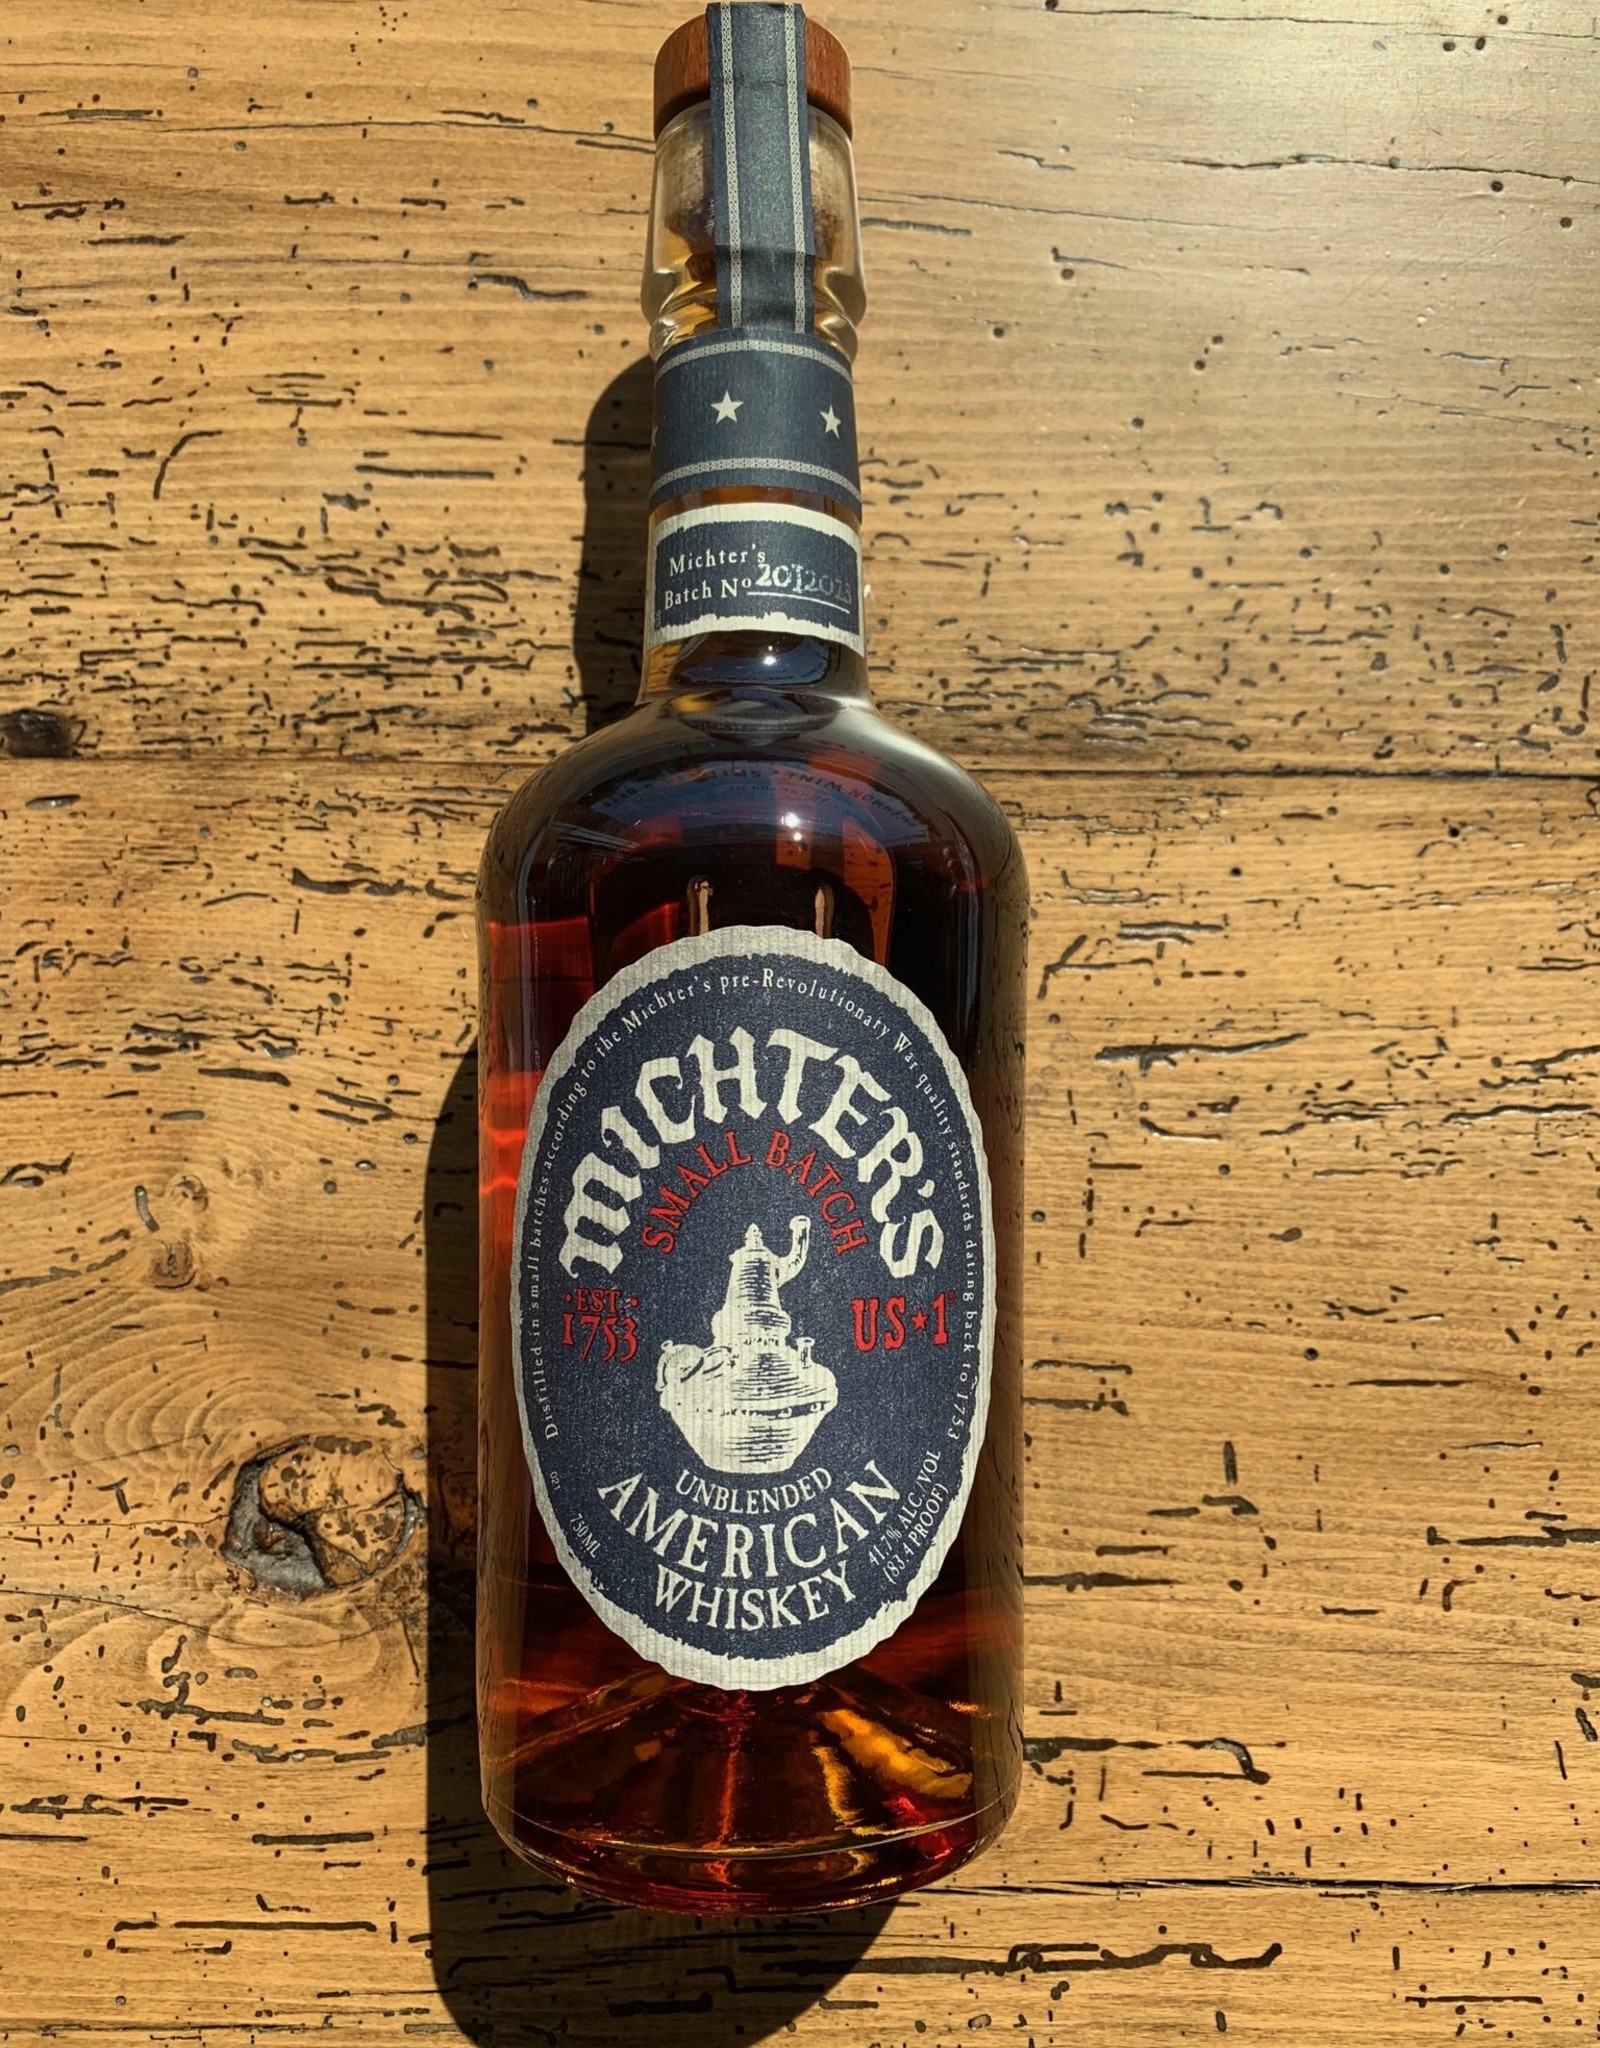 Michters Unblended American Whiskey